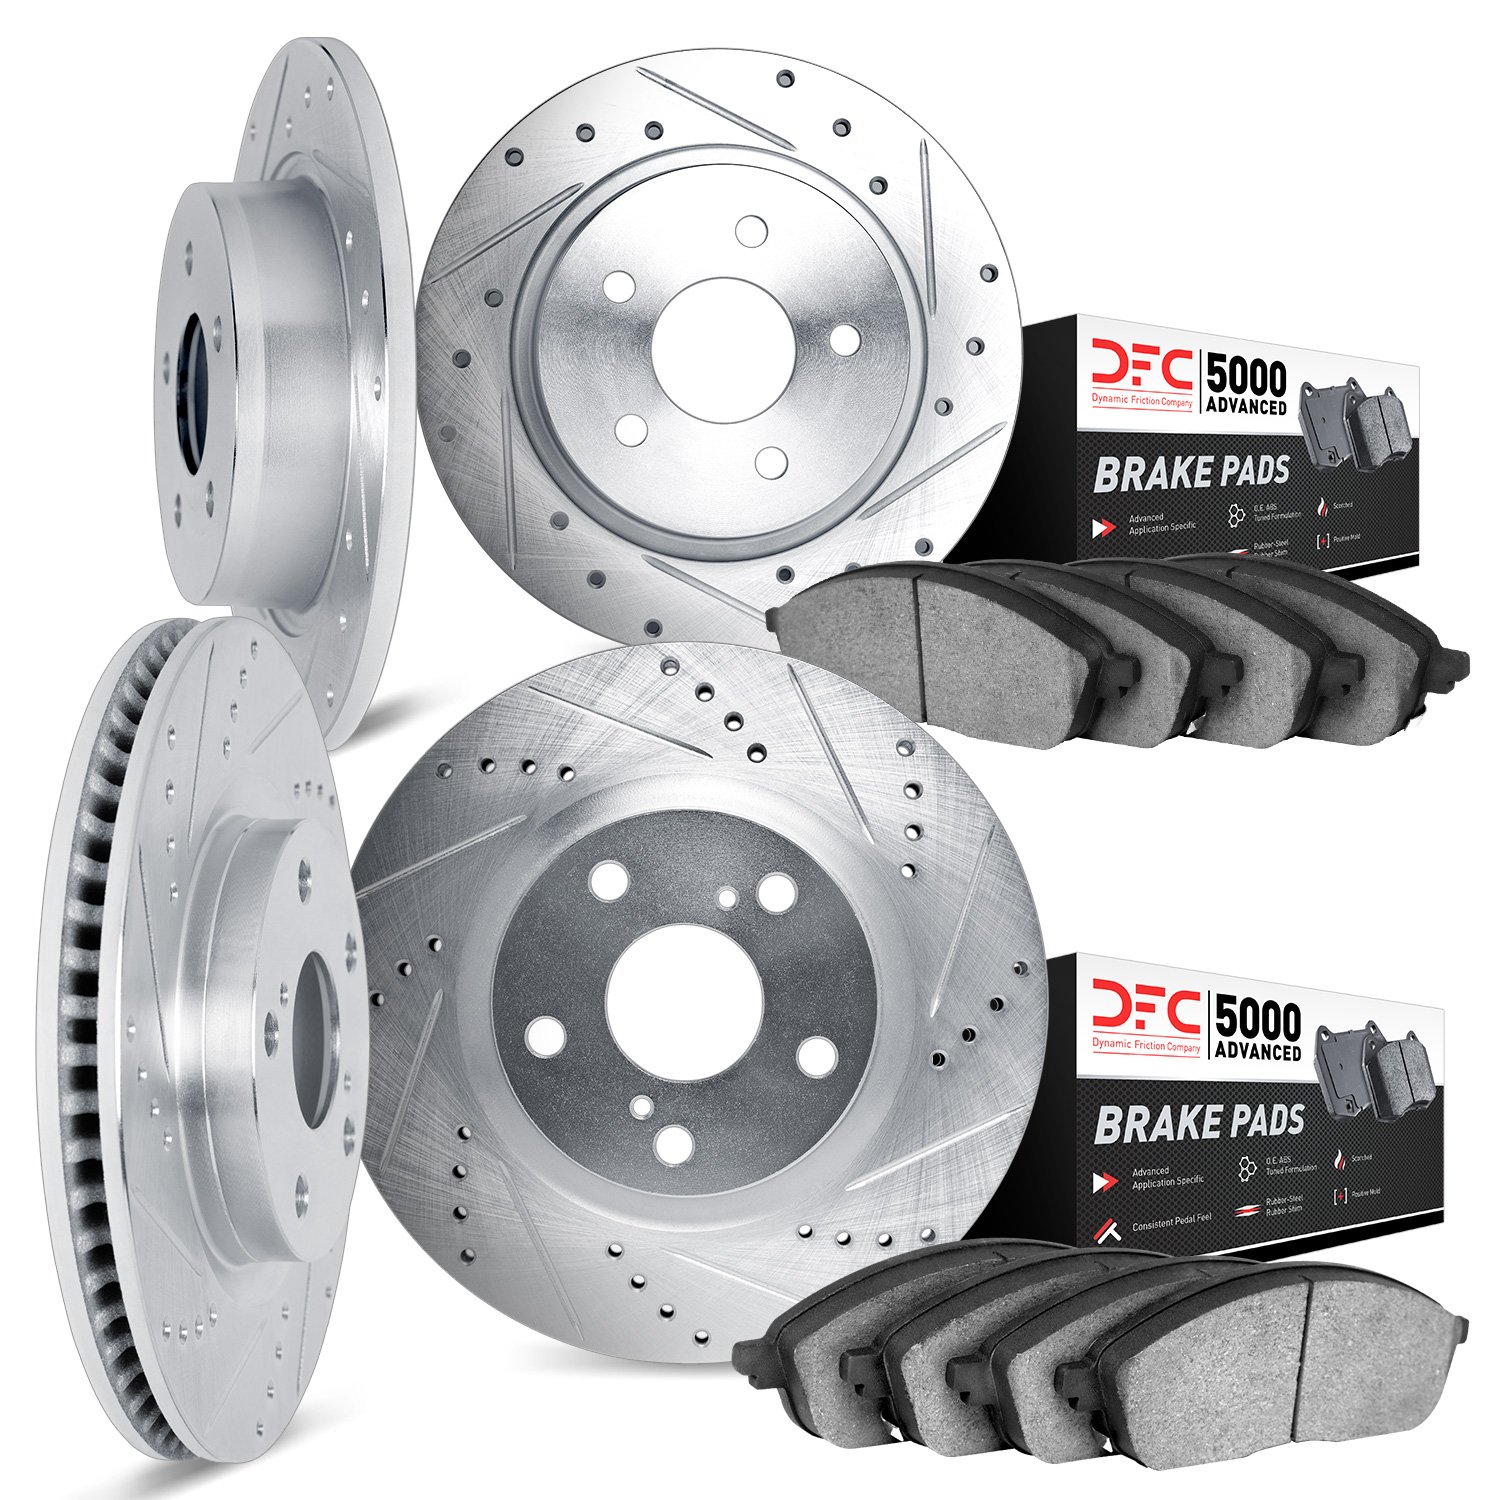 7504-74073 Drilled/Slotted Brake Rotors w/5000 Advanced Brake Pads Kit [Silver], 2012-2015 Audi/Volkswagen, Position: Front and